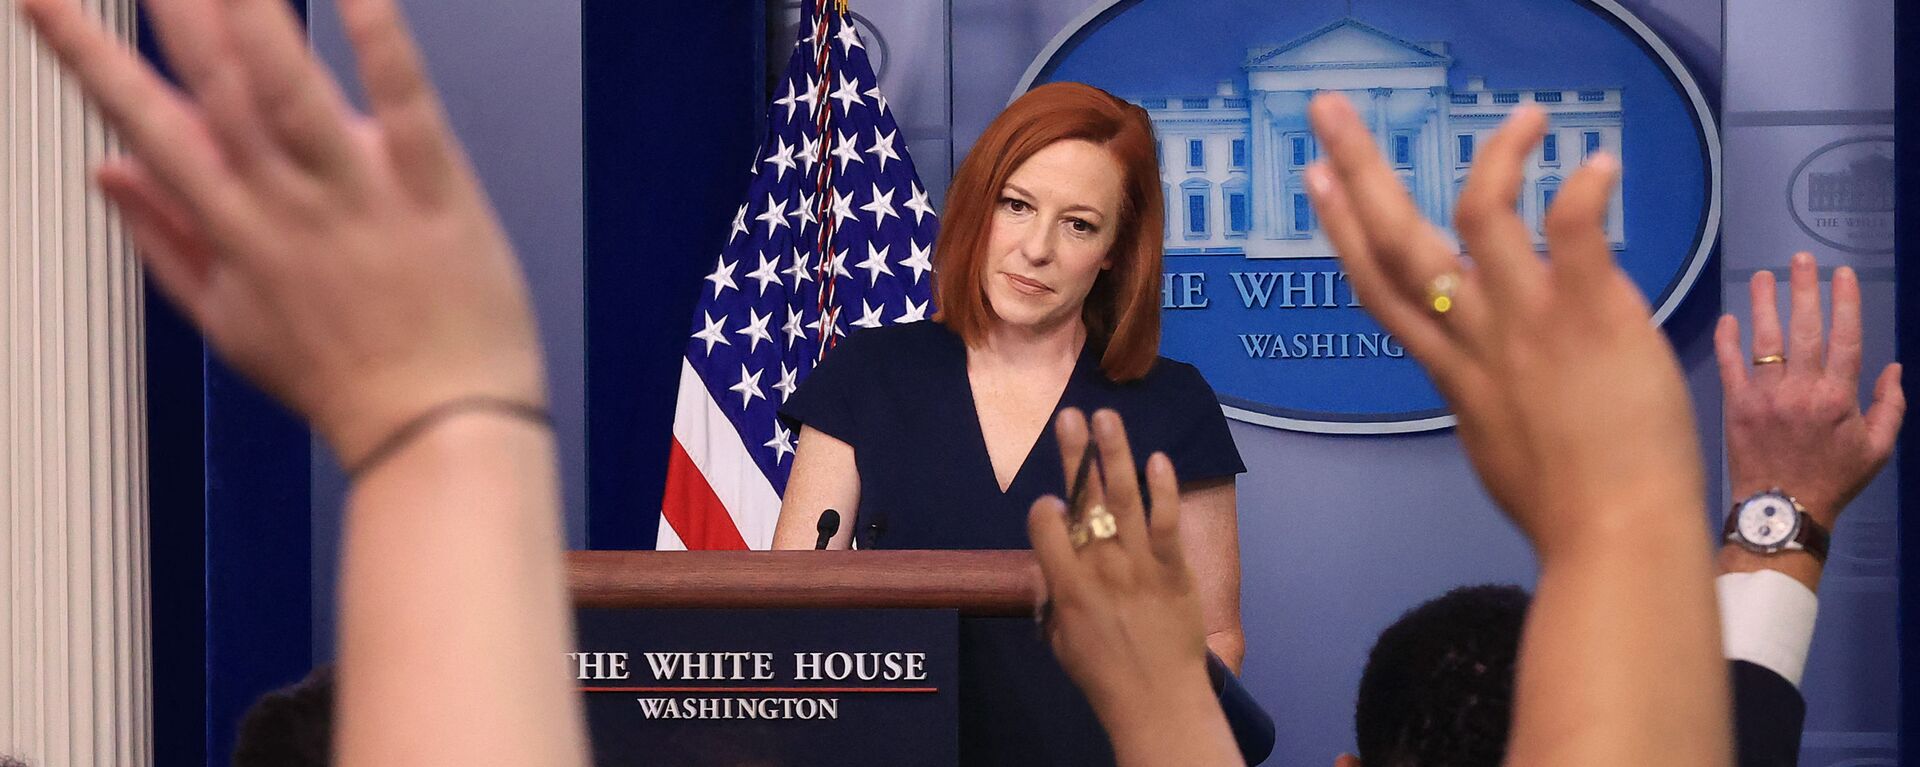 White House Press Secretary Jen Psaki takes questions from reporters during the daily news conference in the Brady Press Briefing Room at the White House on 8 June 2021 in Washington, DC. Psaki announced actions the Biden administration says it will take to strengthen critical American supply chains and promote economic security, national security, and good-paying, union jobs here at home. - Sputnik International, 1920, 05.08.2021